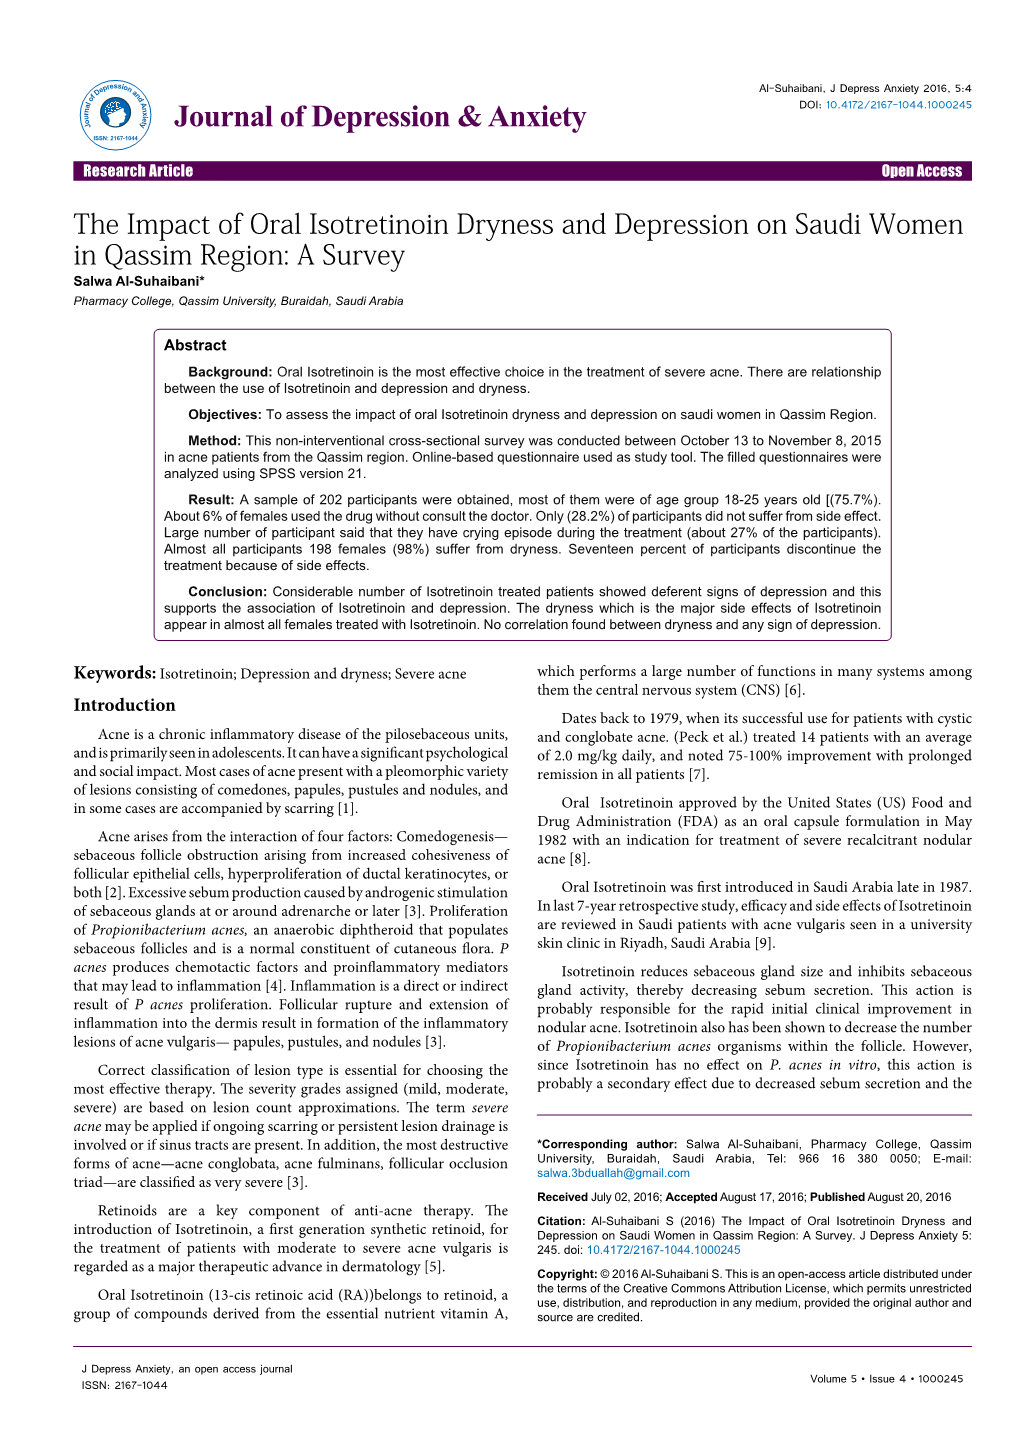 The Impact of Oral Isotretinoin Dryness and Depression on Saudi